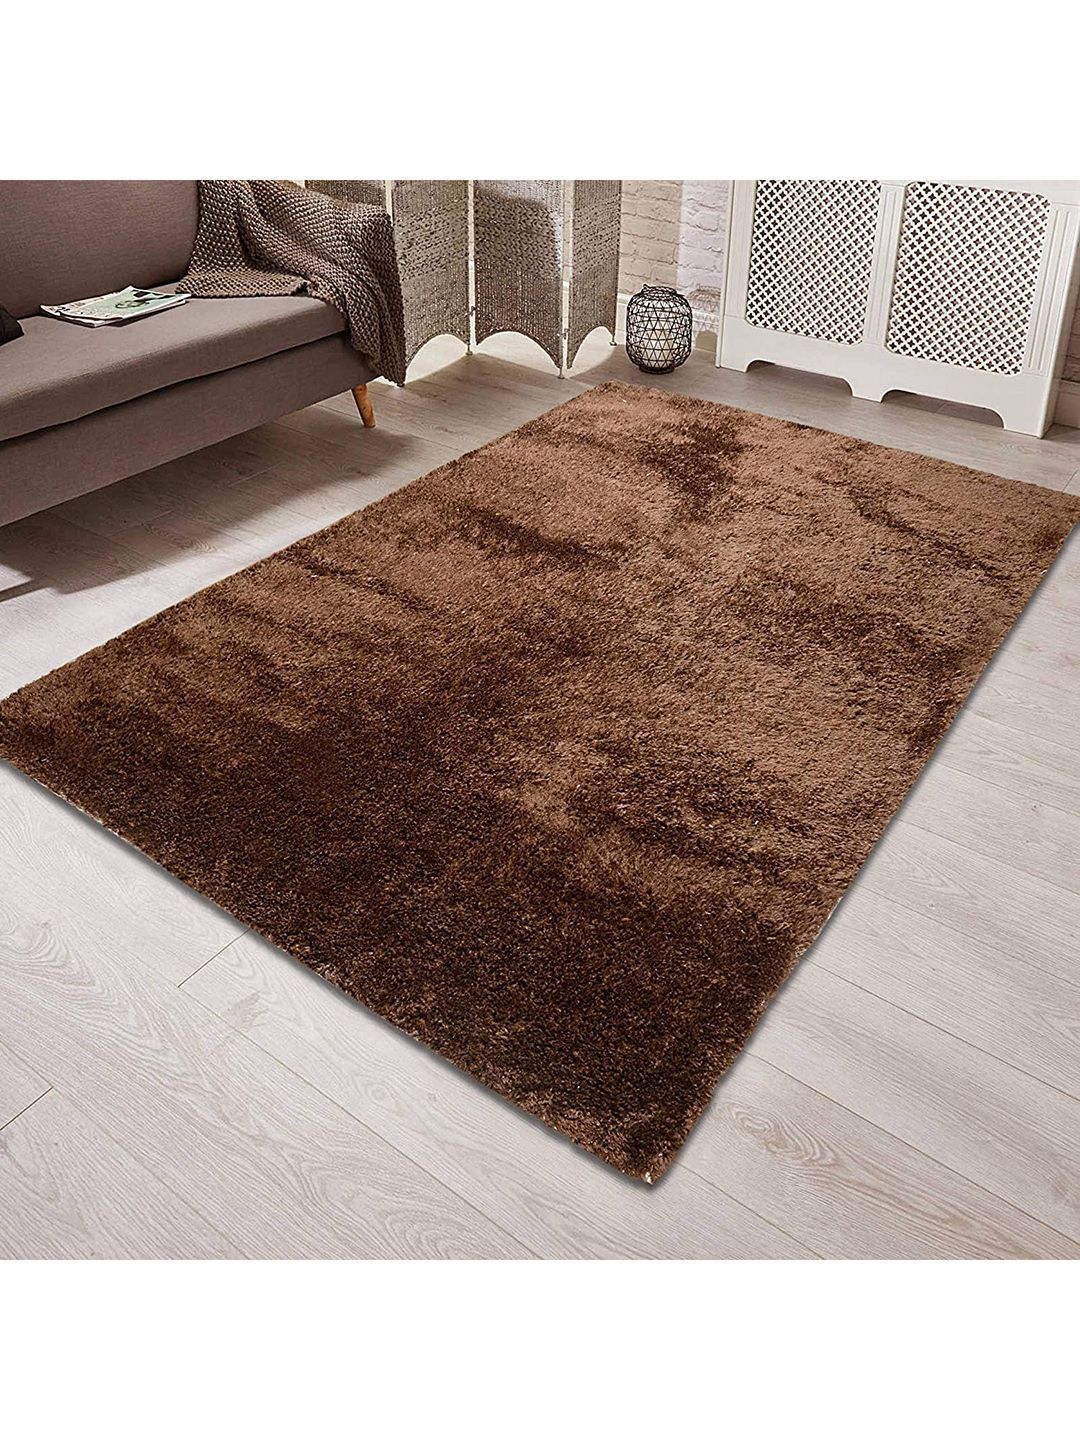 Saral Home Brown Solid Cotton Carpet Price in India